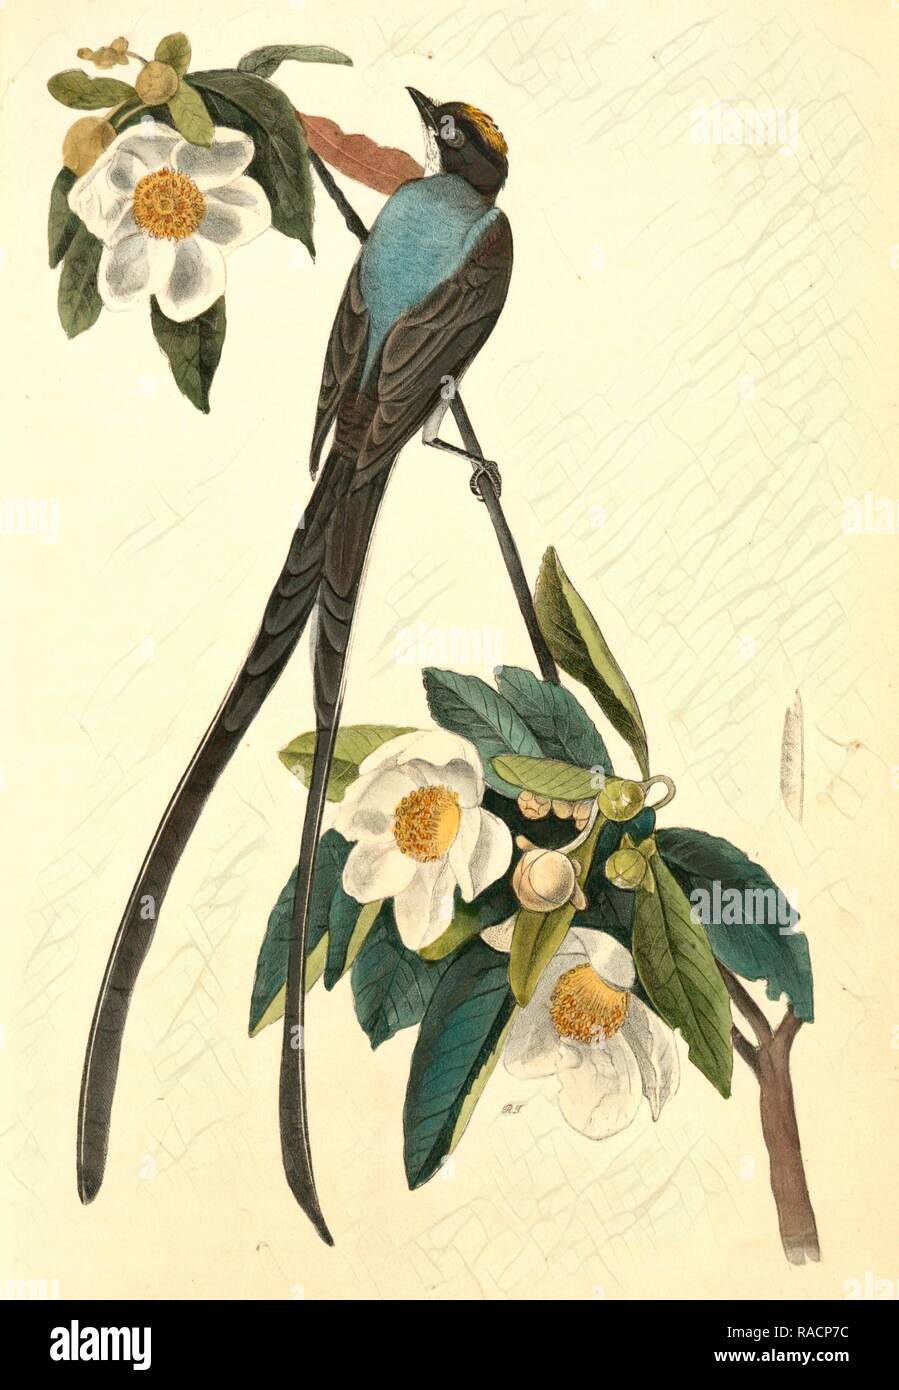 Fork-tailed Flycatcher. Gordonia Lasianthus., Audubon, John James, 1785-1851 Reimagined by Gibon. Classic art with a reimagined Stock Photo